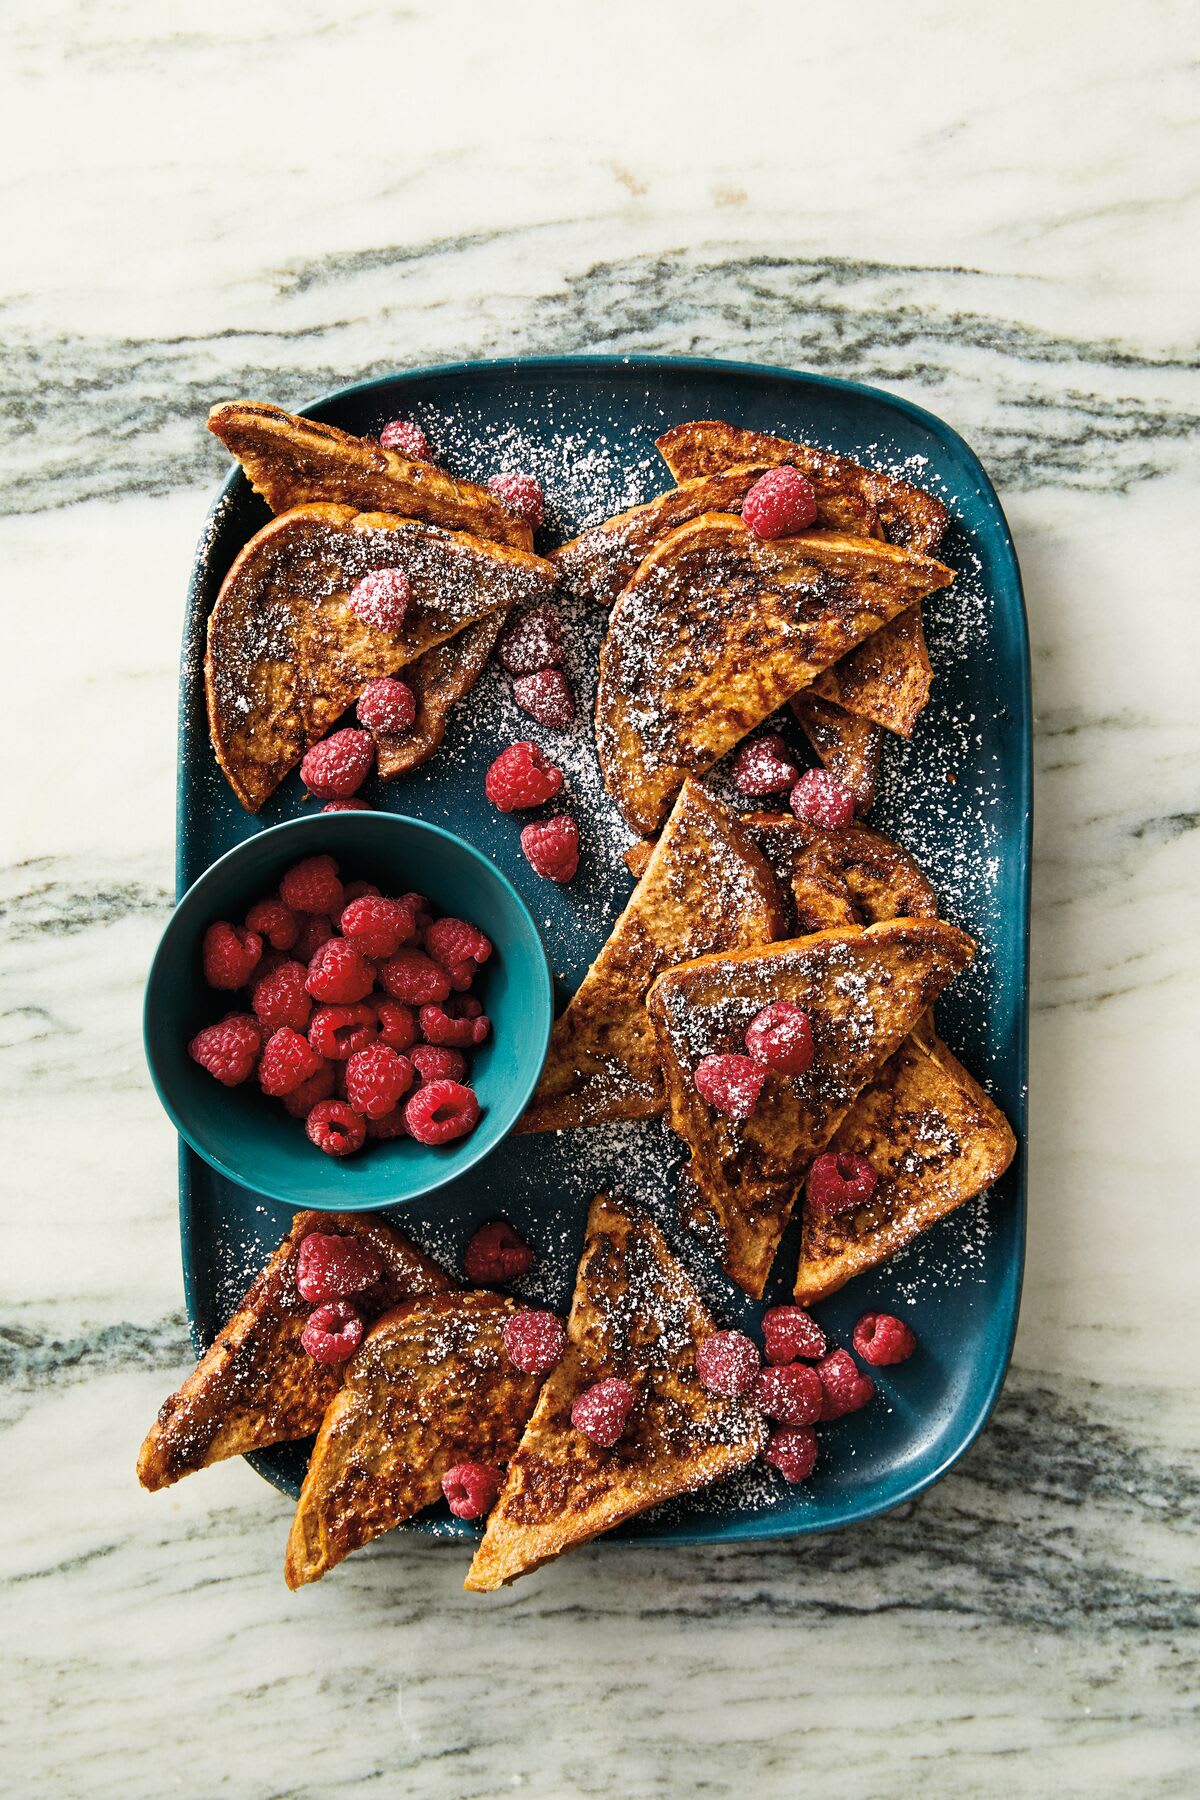 Photo of Cinnamon French toast with raspberries by WW